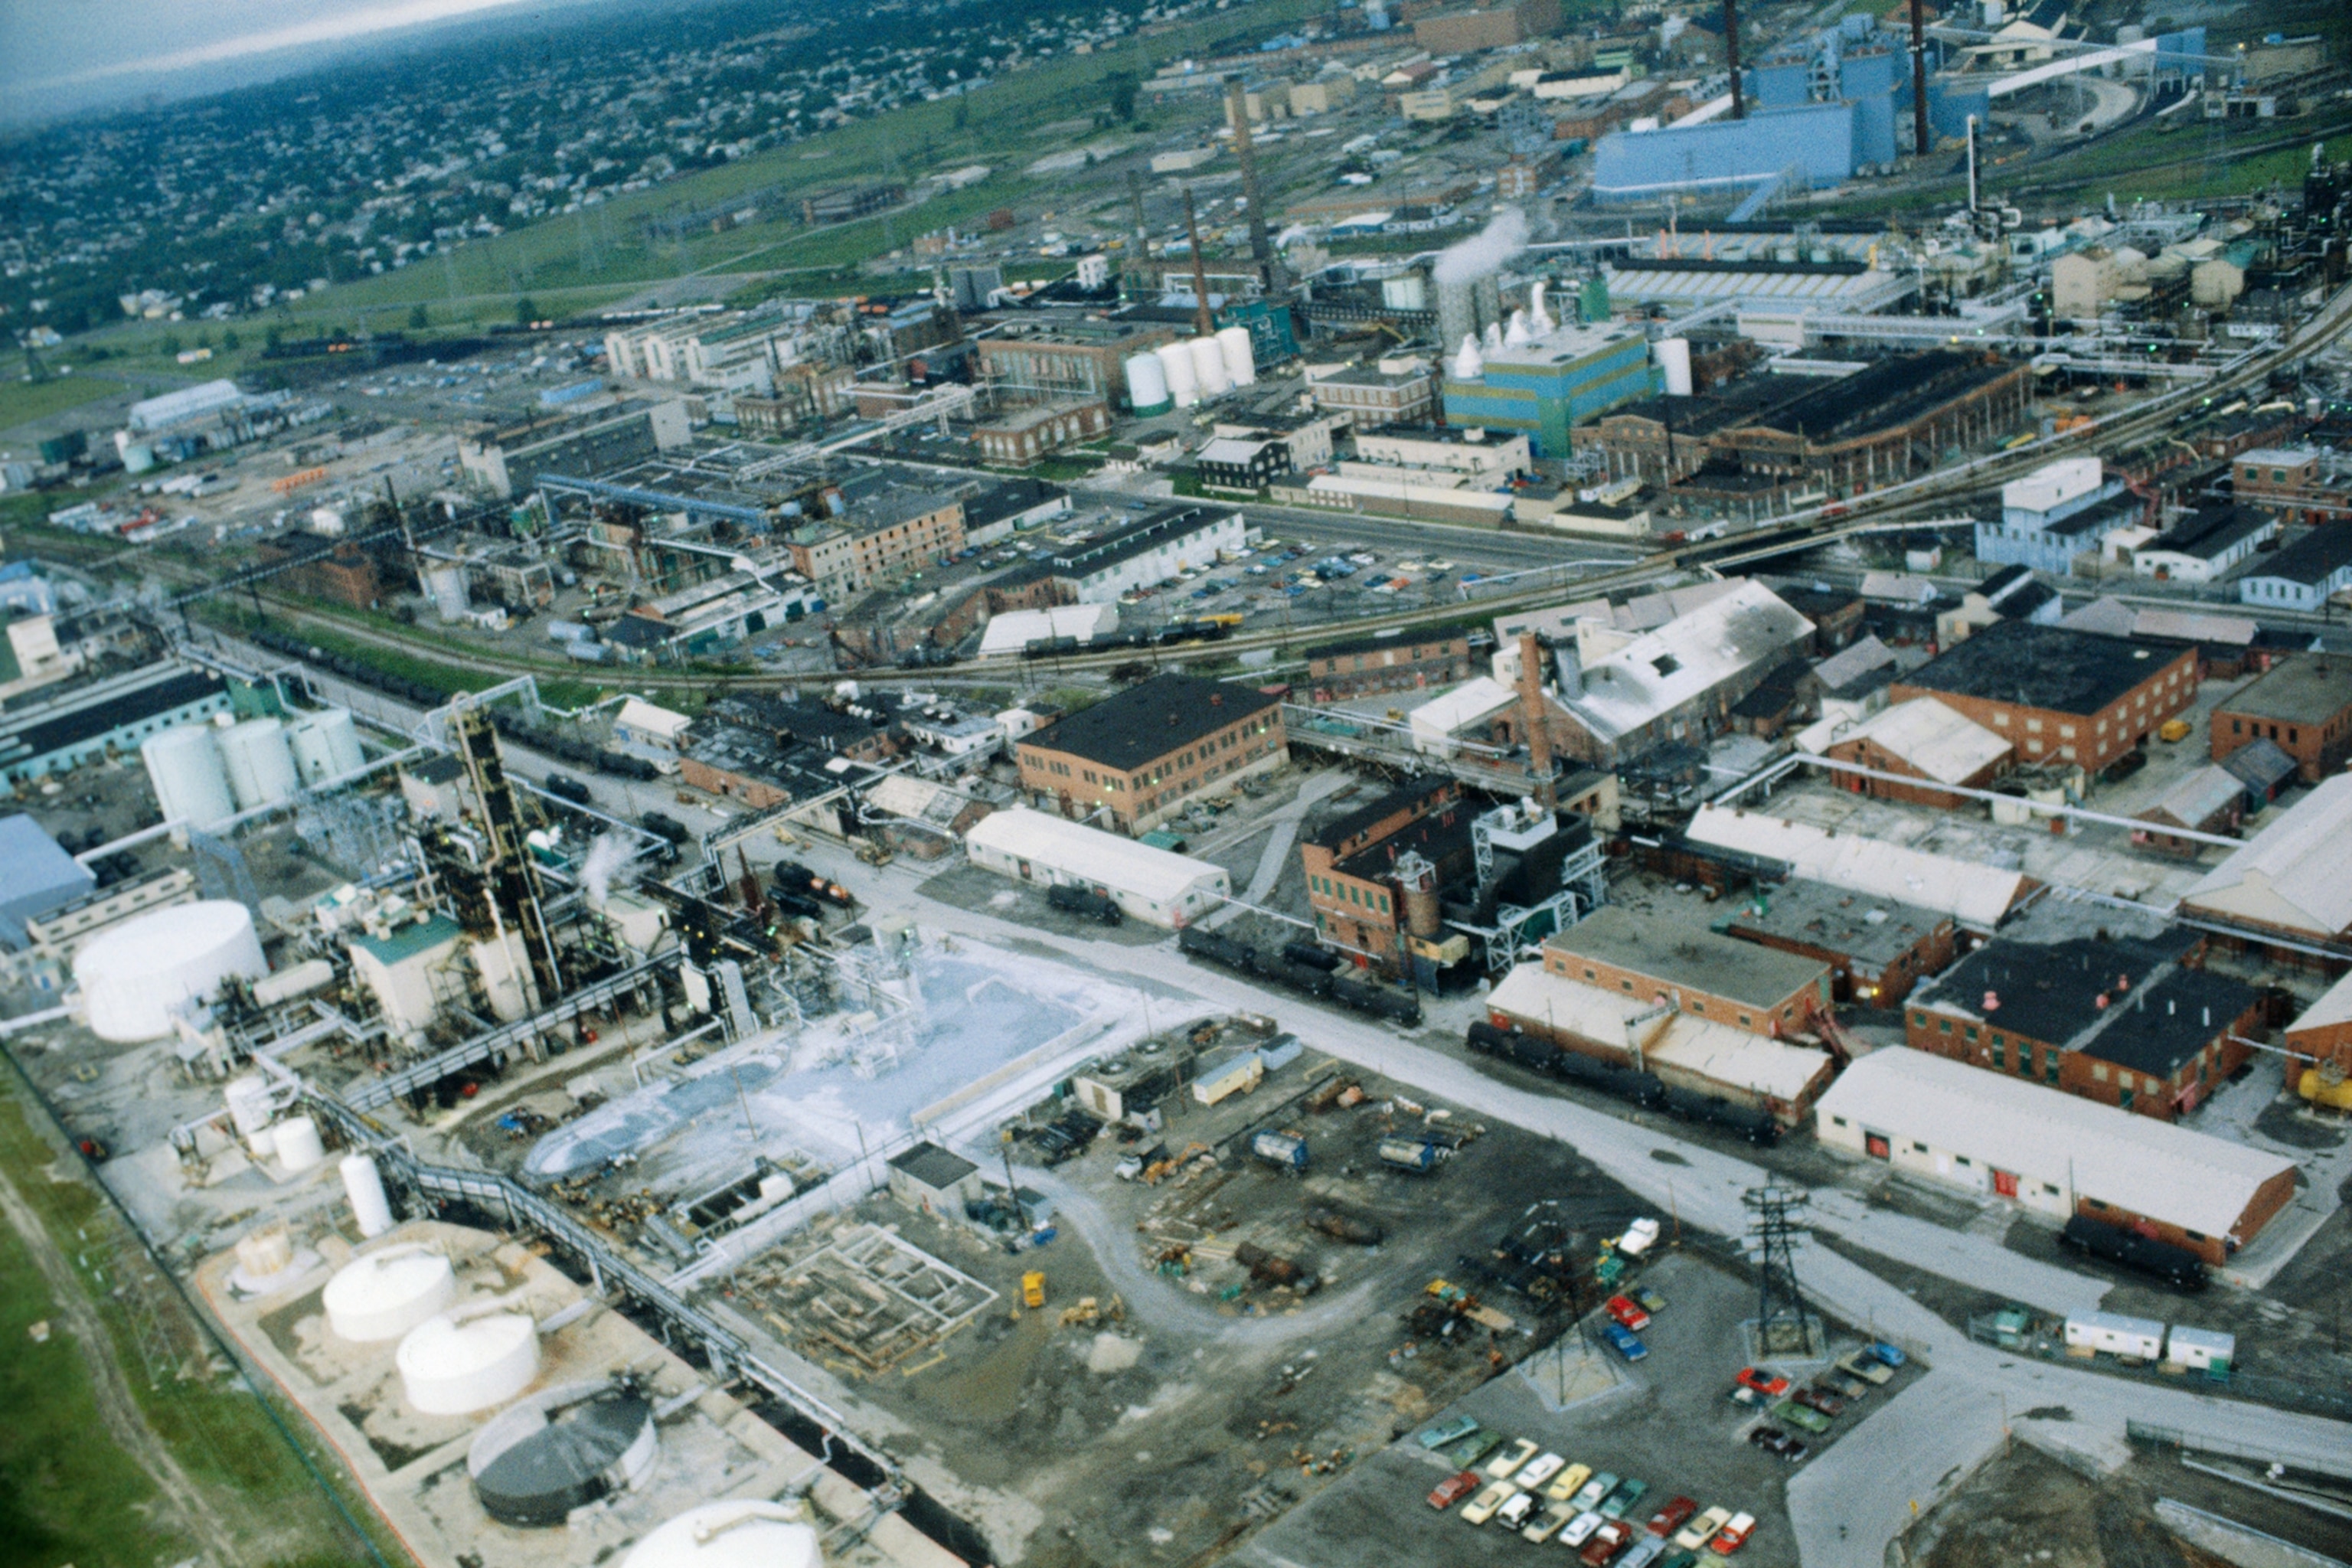 An aerial view shows an industrial space, buildings, parking lots and smoke. In the background you can see the town nearby.